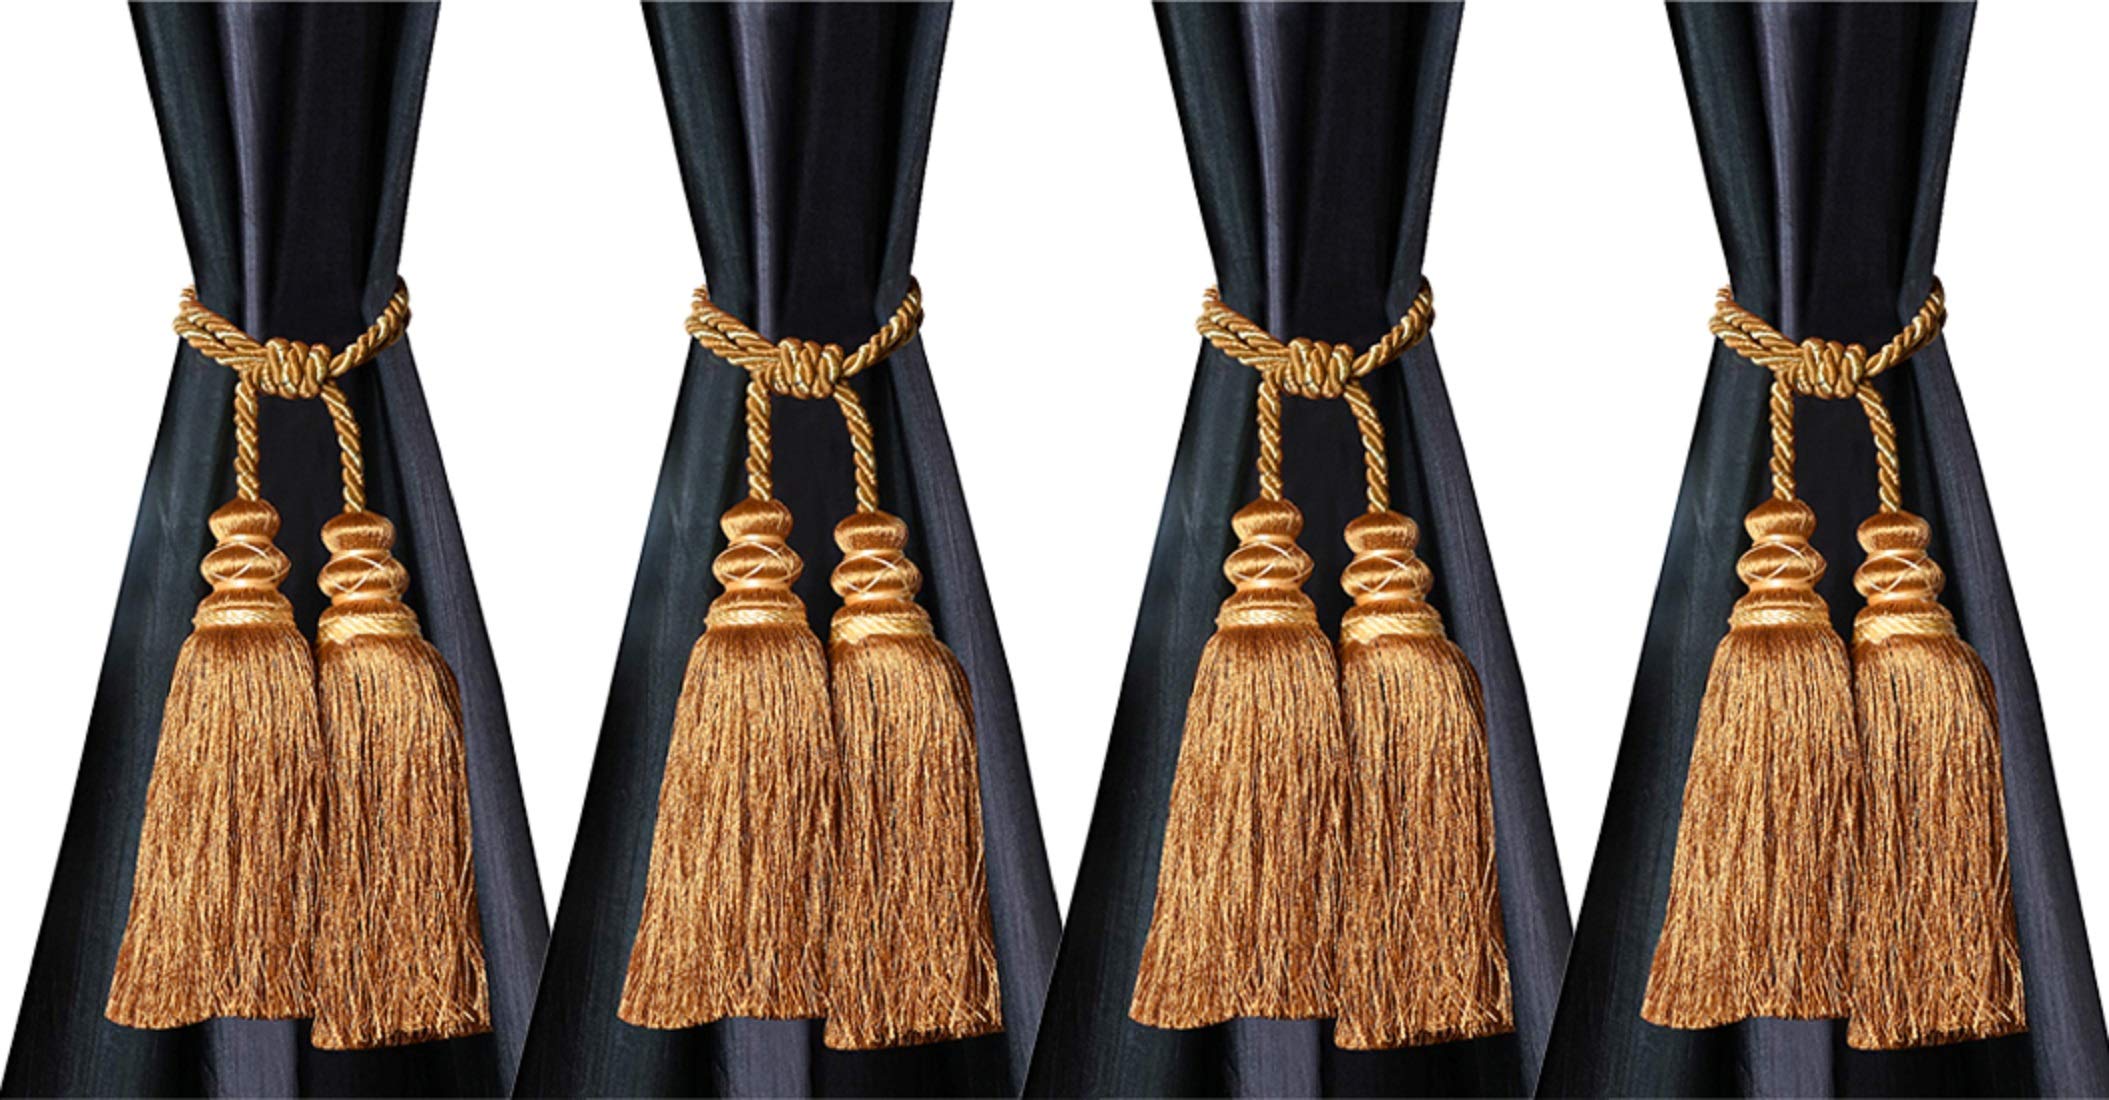 Kuber Industries Polyester 4 Pieces Curtain Tie Back Tassel Set (Gold) CTKTC33494